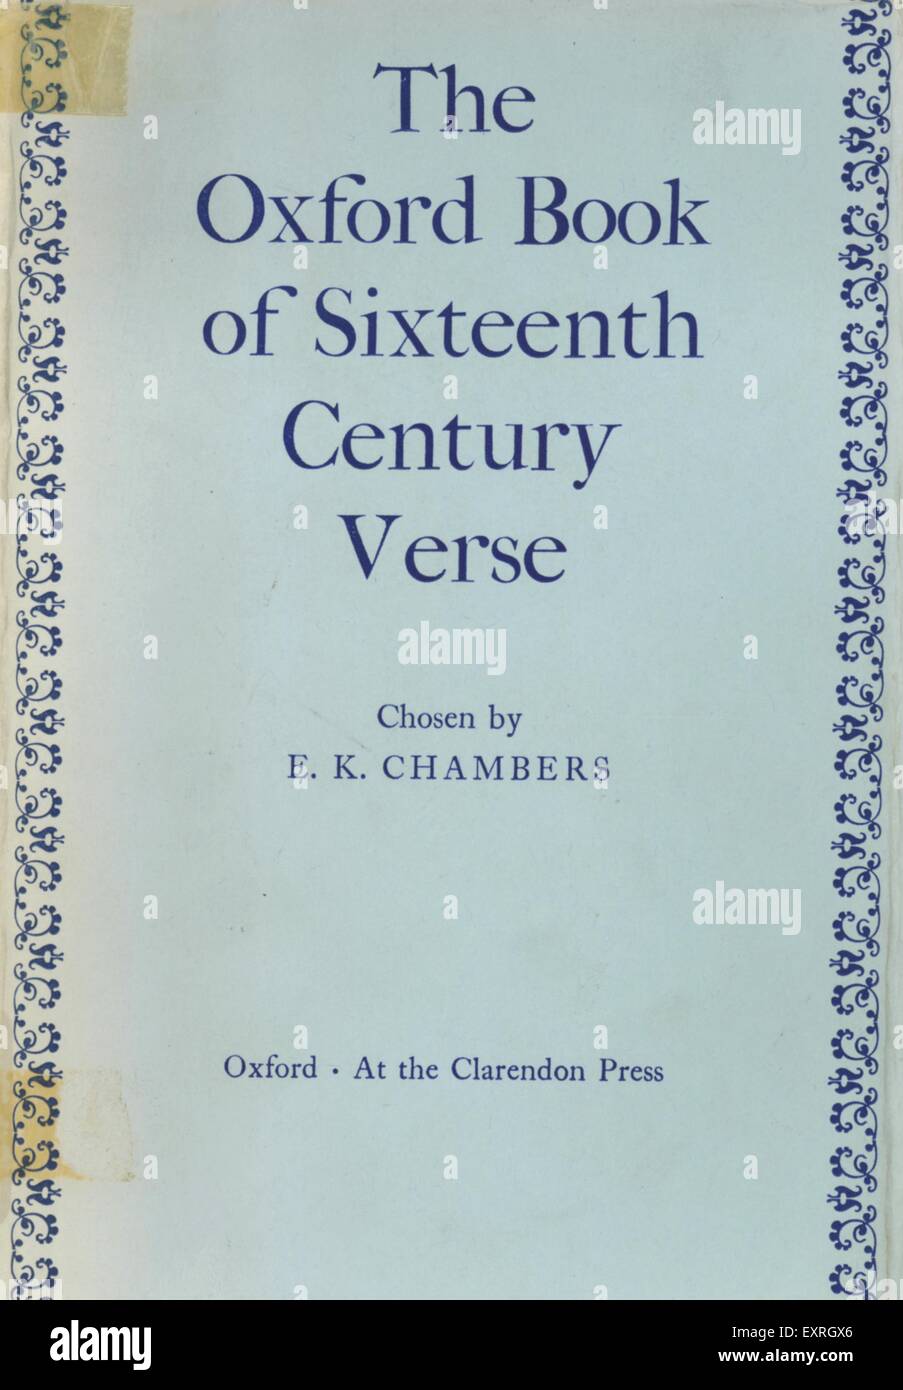 1960s UK The Oxford Book of Sixteenth Century Verse Book Cover Stock Photo